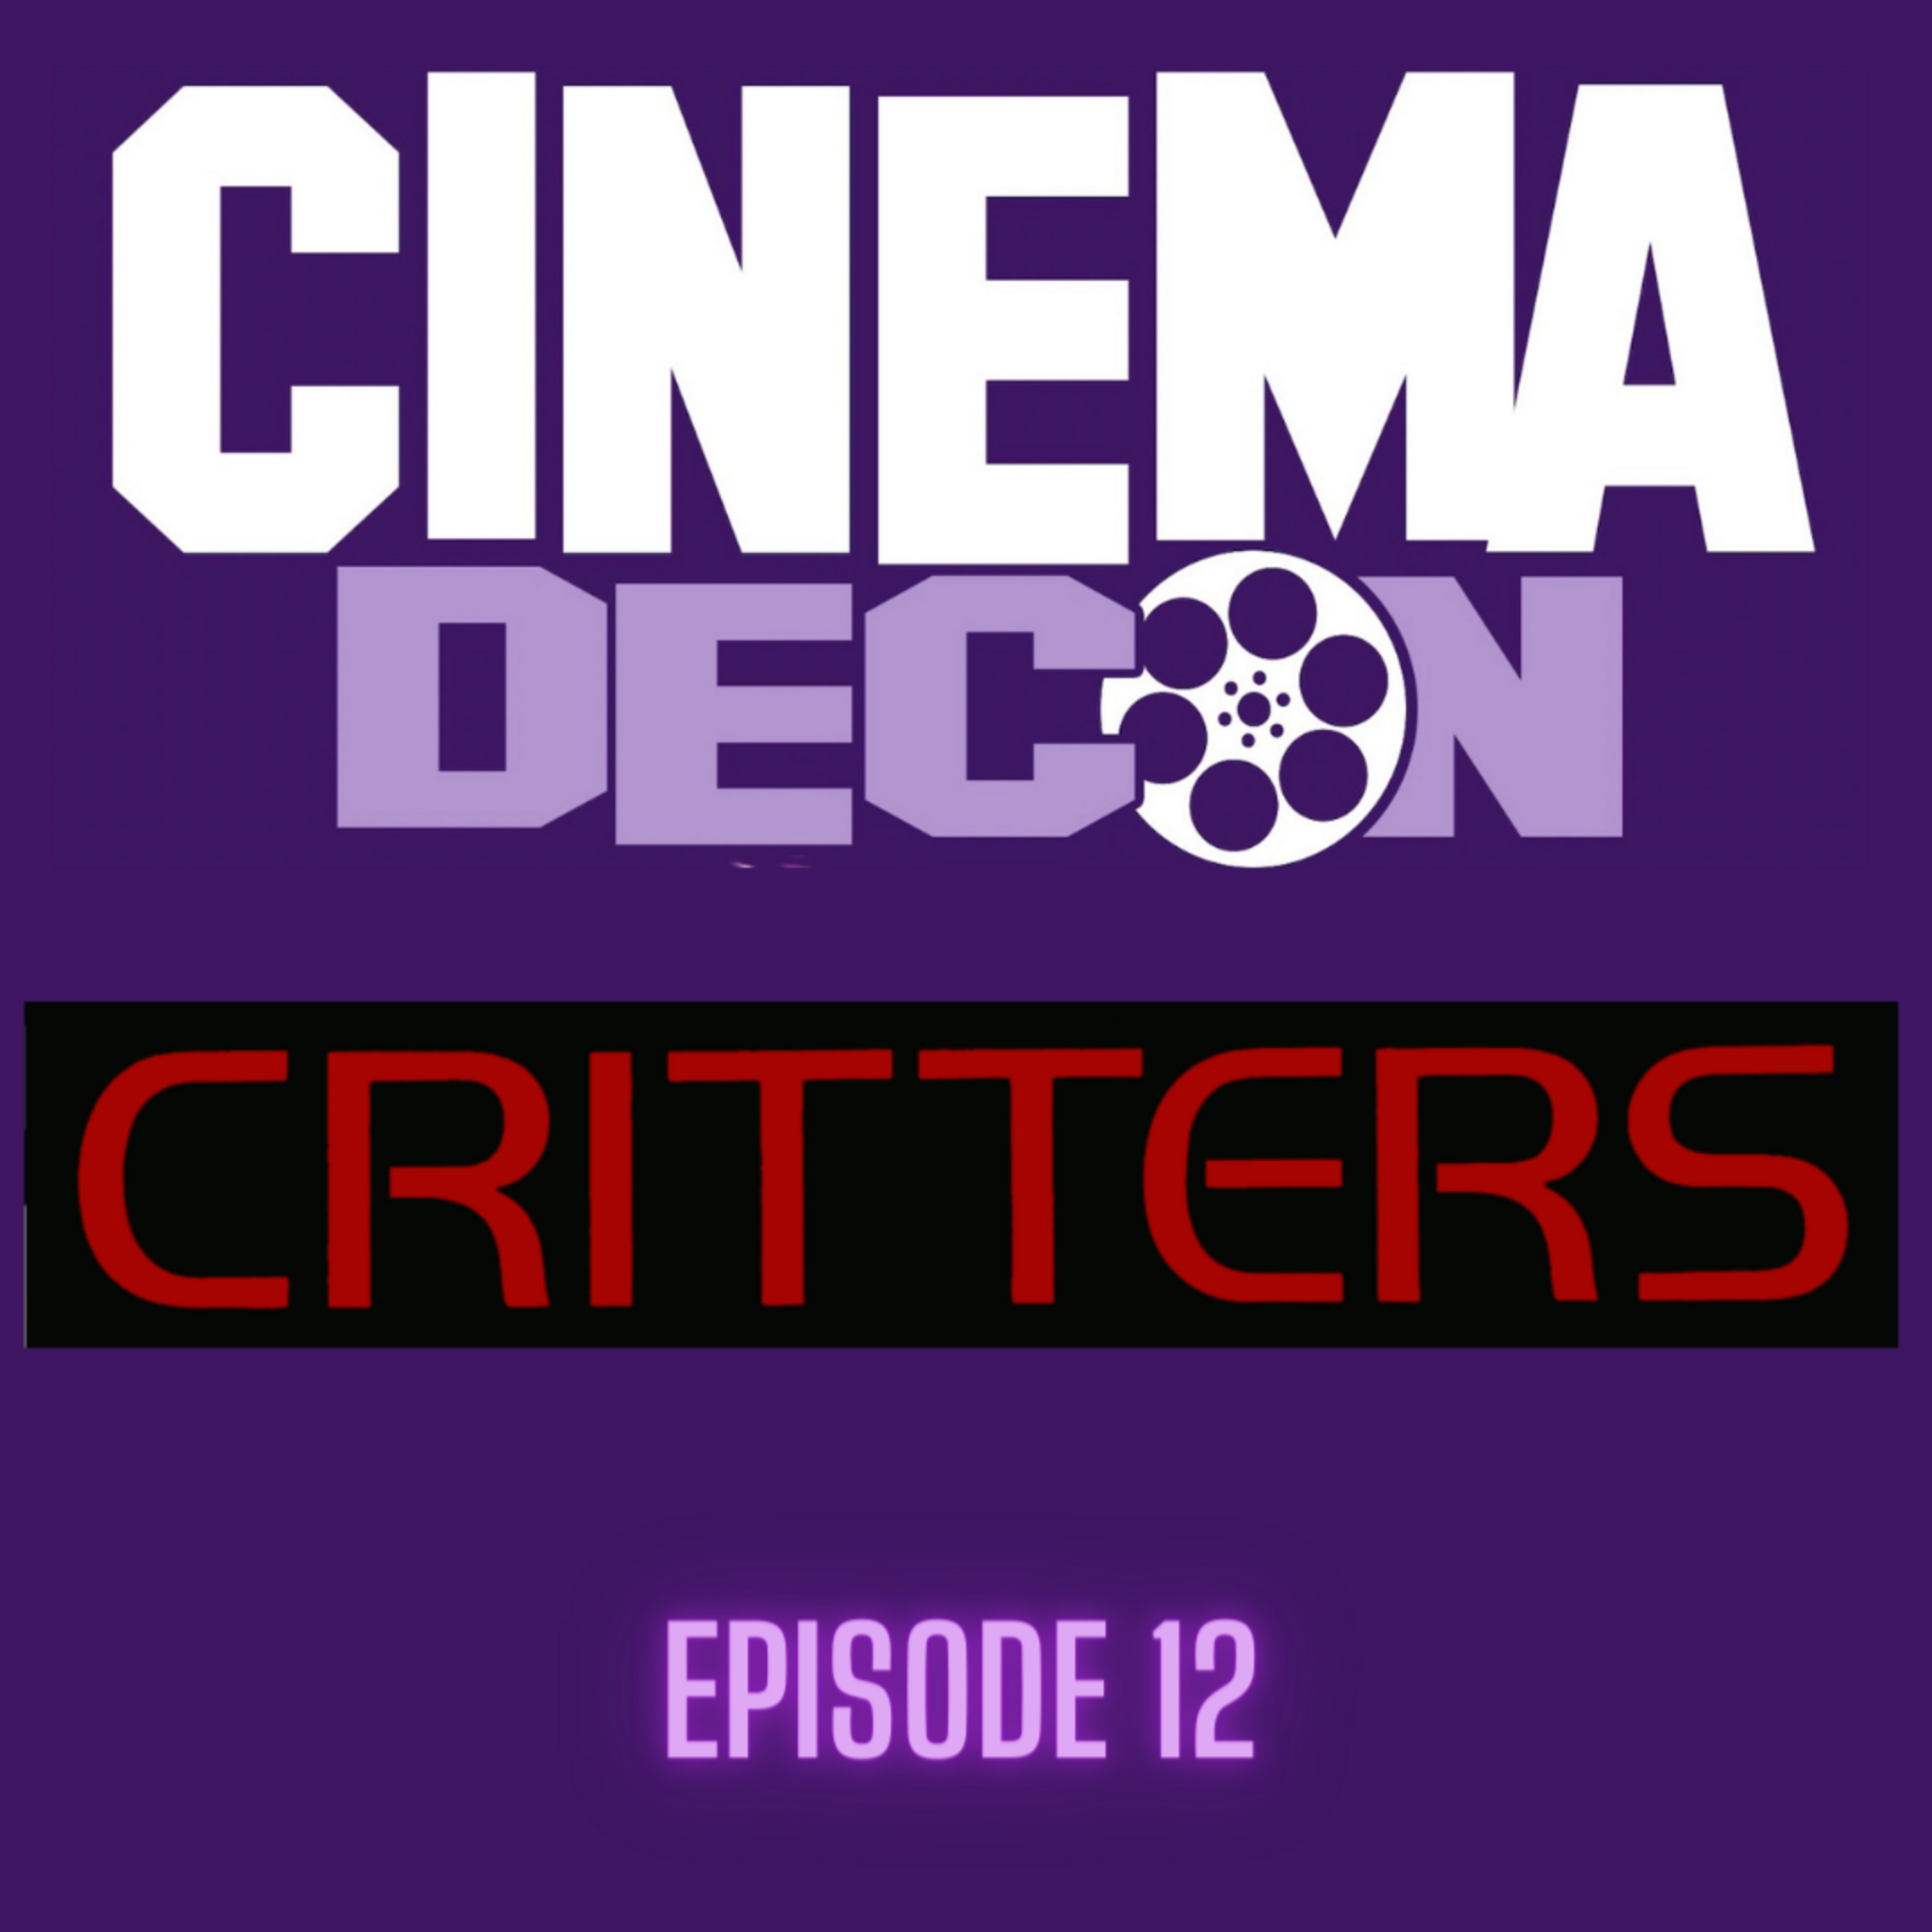 Episode 12: Critters (1986) - Movie Review and Analysis